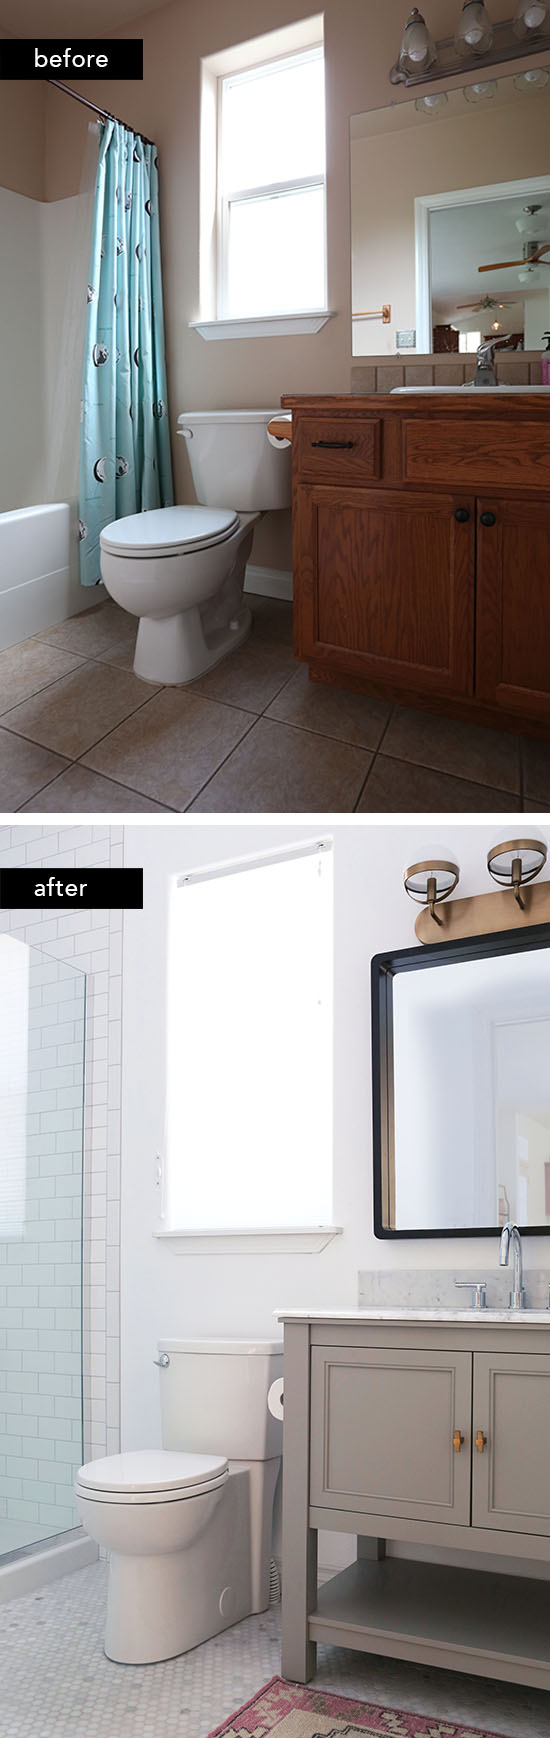 Our Budget-Friendly Guest Bathroom Remodel | At Home In Love